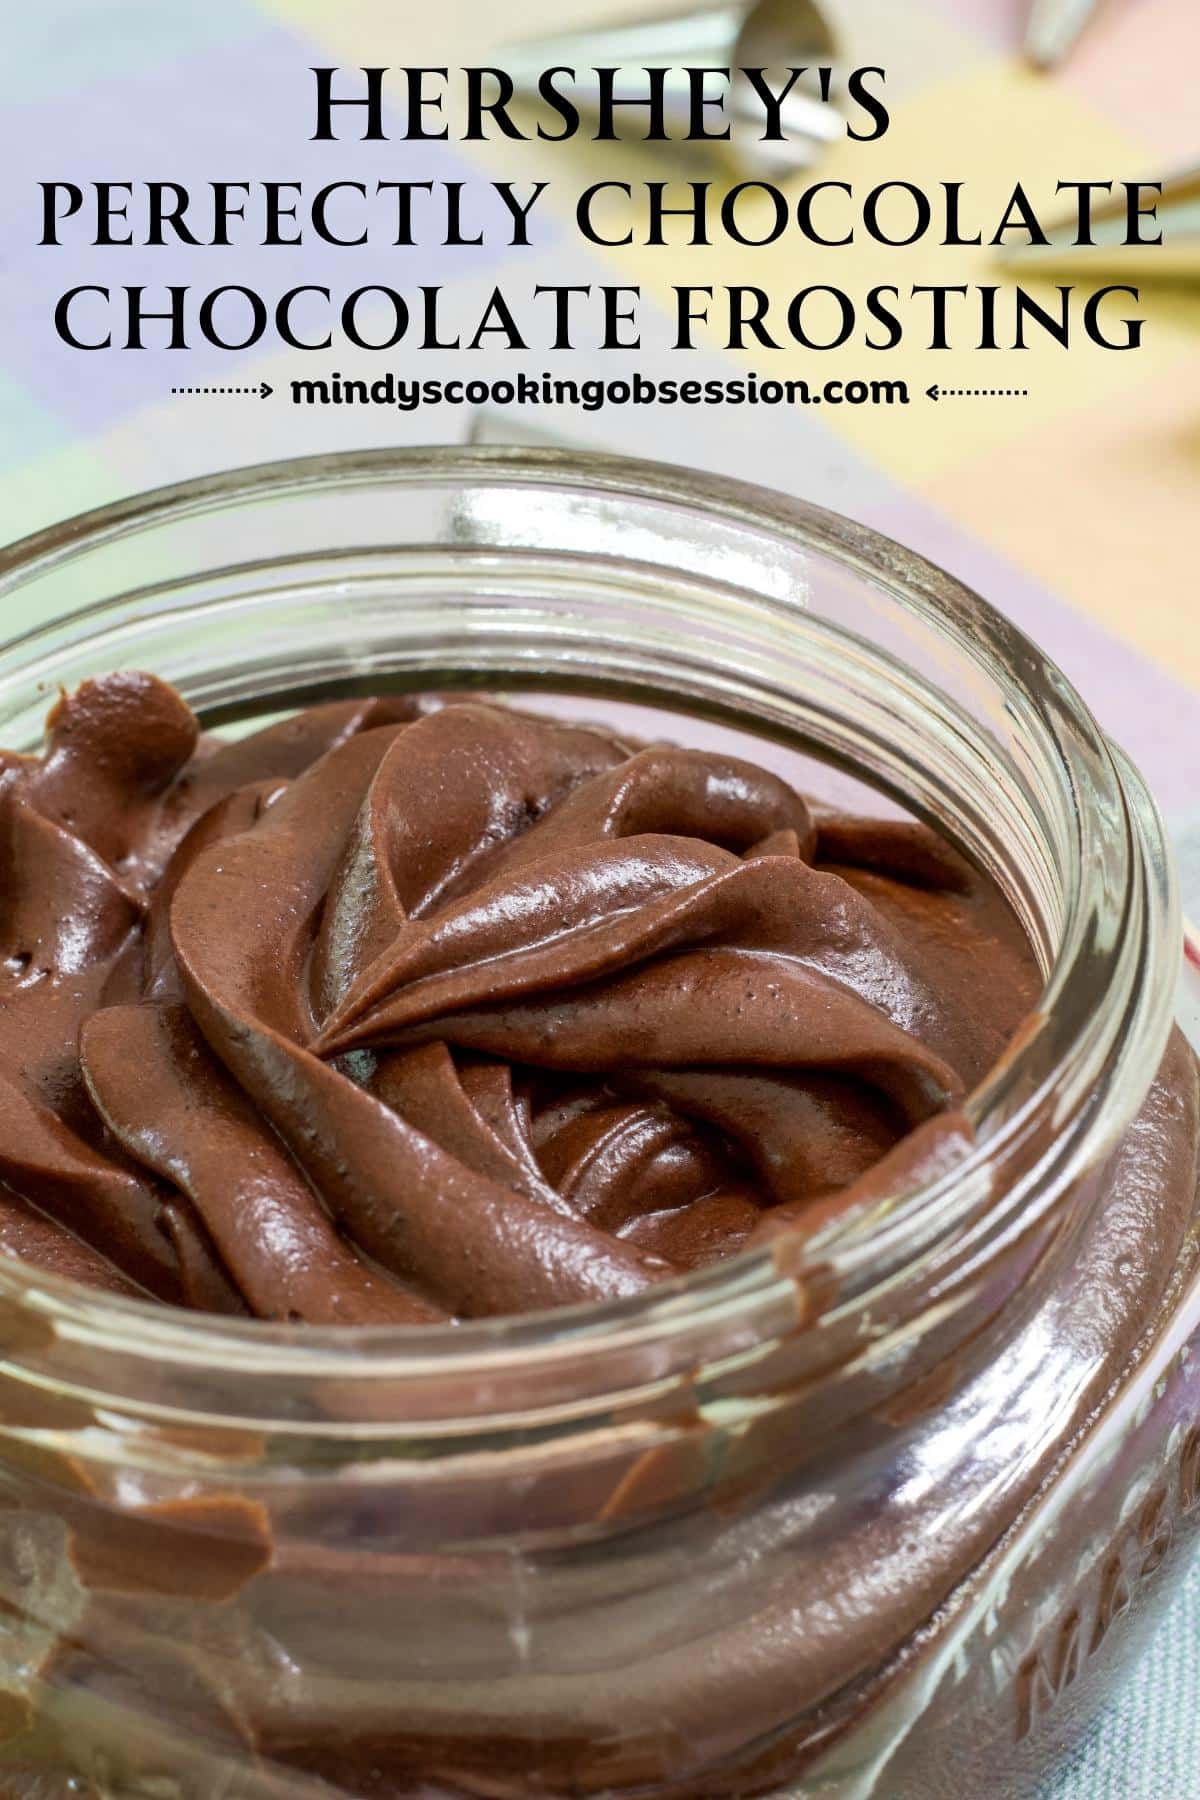 Easy Hershey's Perfectly Chocolate Frosting Recipe only requires 5 ingredients, is made in one bowl, and no electric mixer is needed! via @mindyscookingobsession